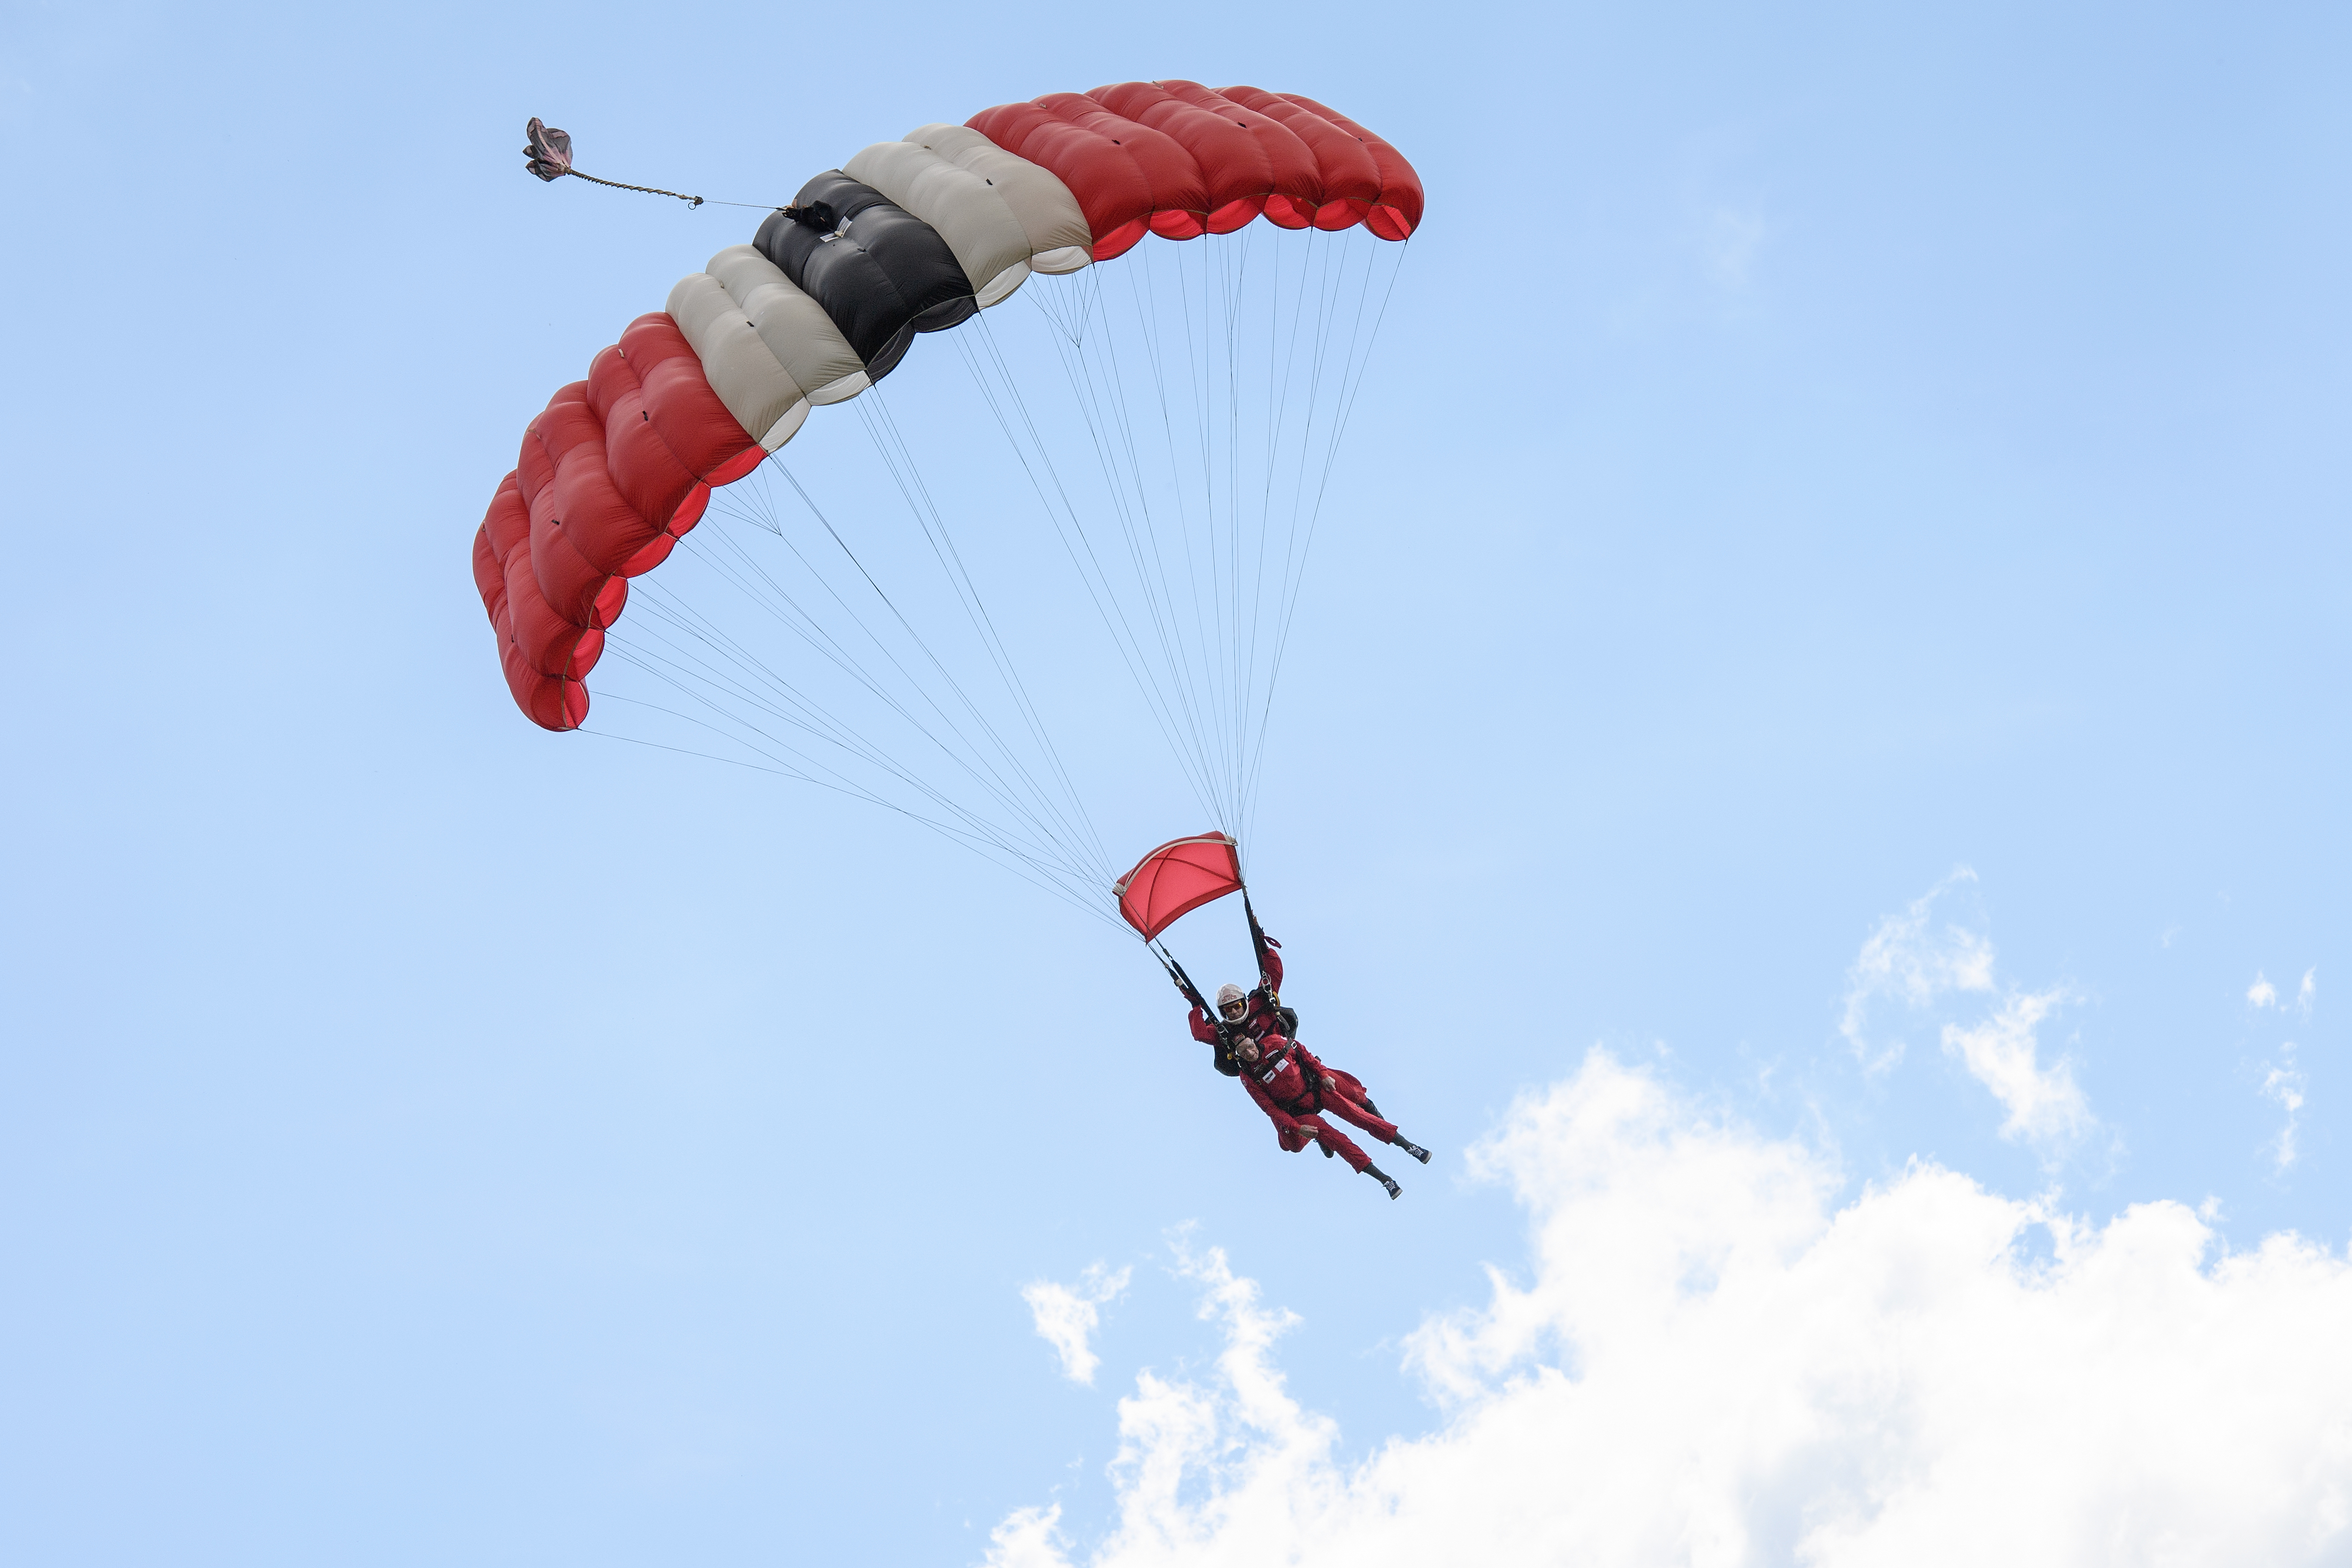 Former paratrooper Fred Glover comes into land during a skydive at the Old Sarum airfield on August 10, 2017 in Salisbury, England. Chelsea Pensioner Mike Smith also plans to complete his 100th skydive. (Photo by Leon Neal/Getty Images)